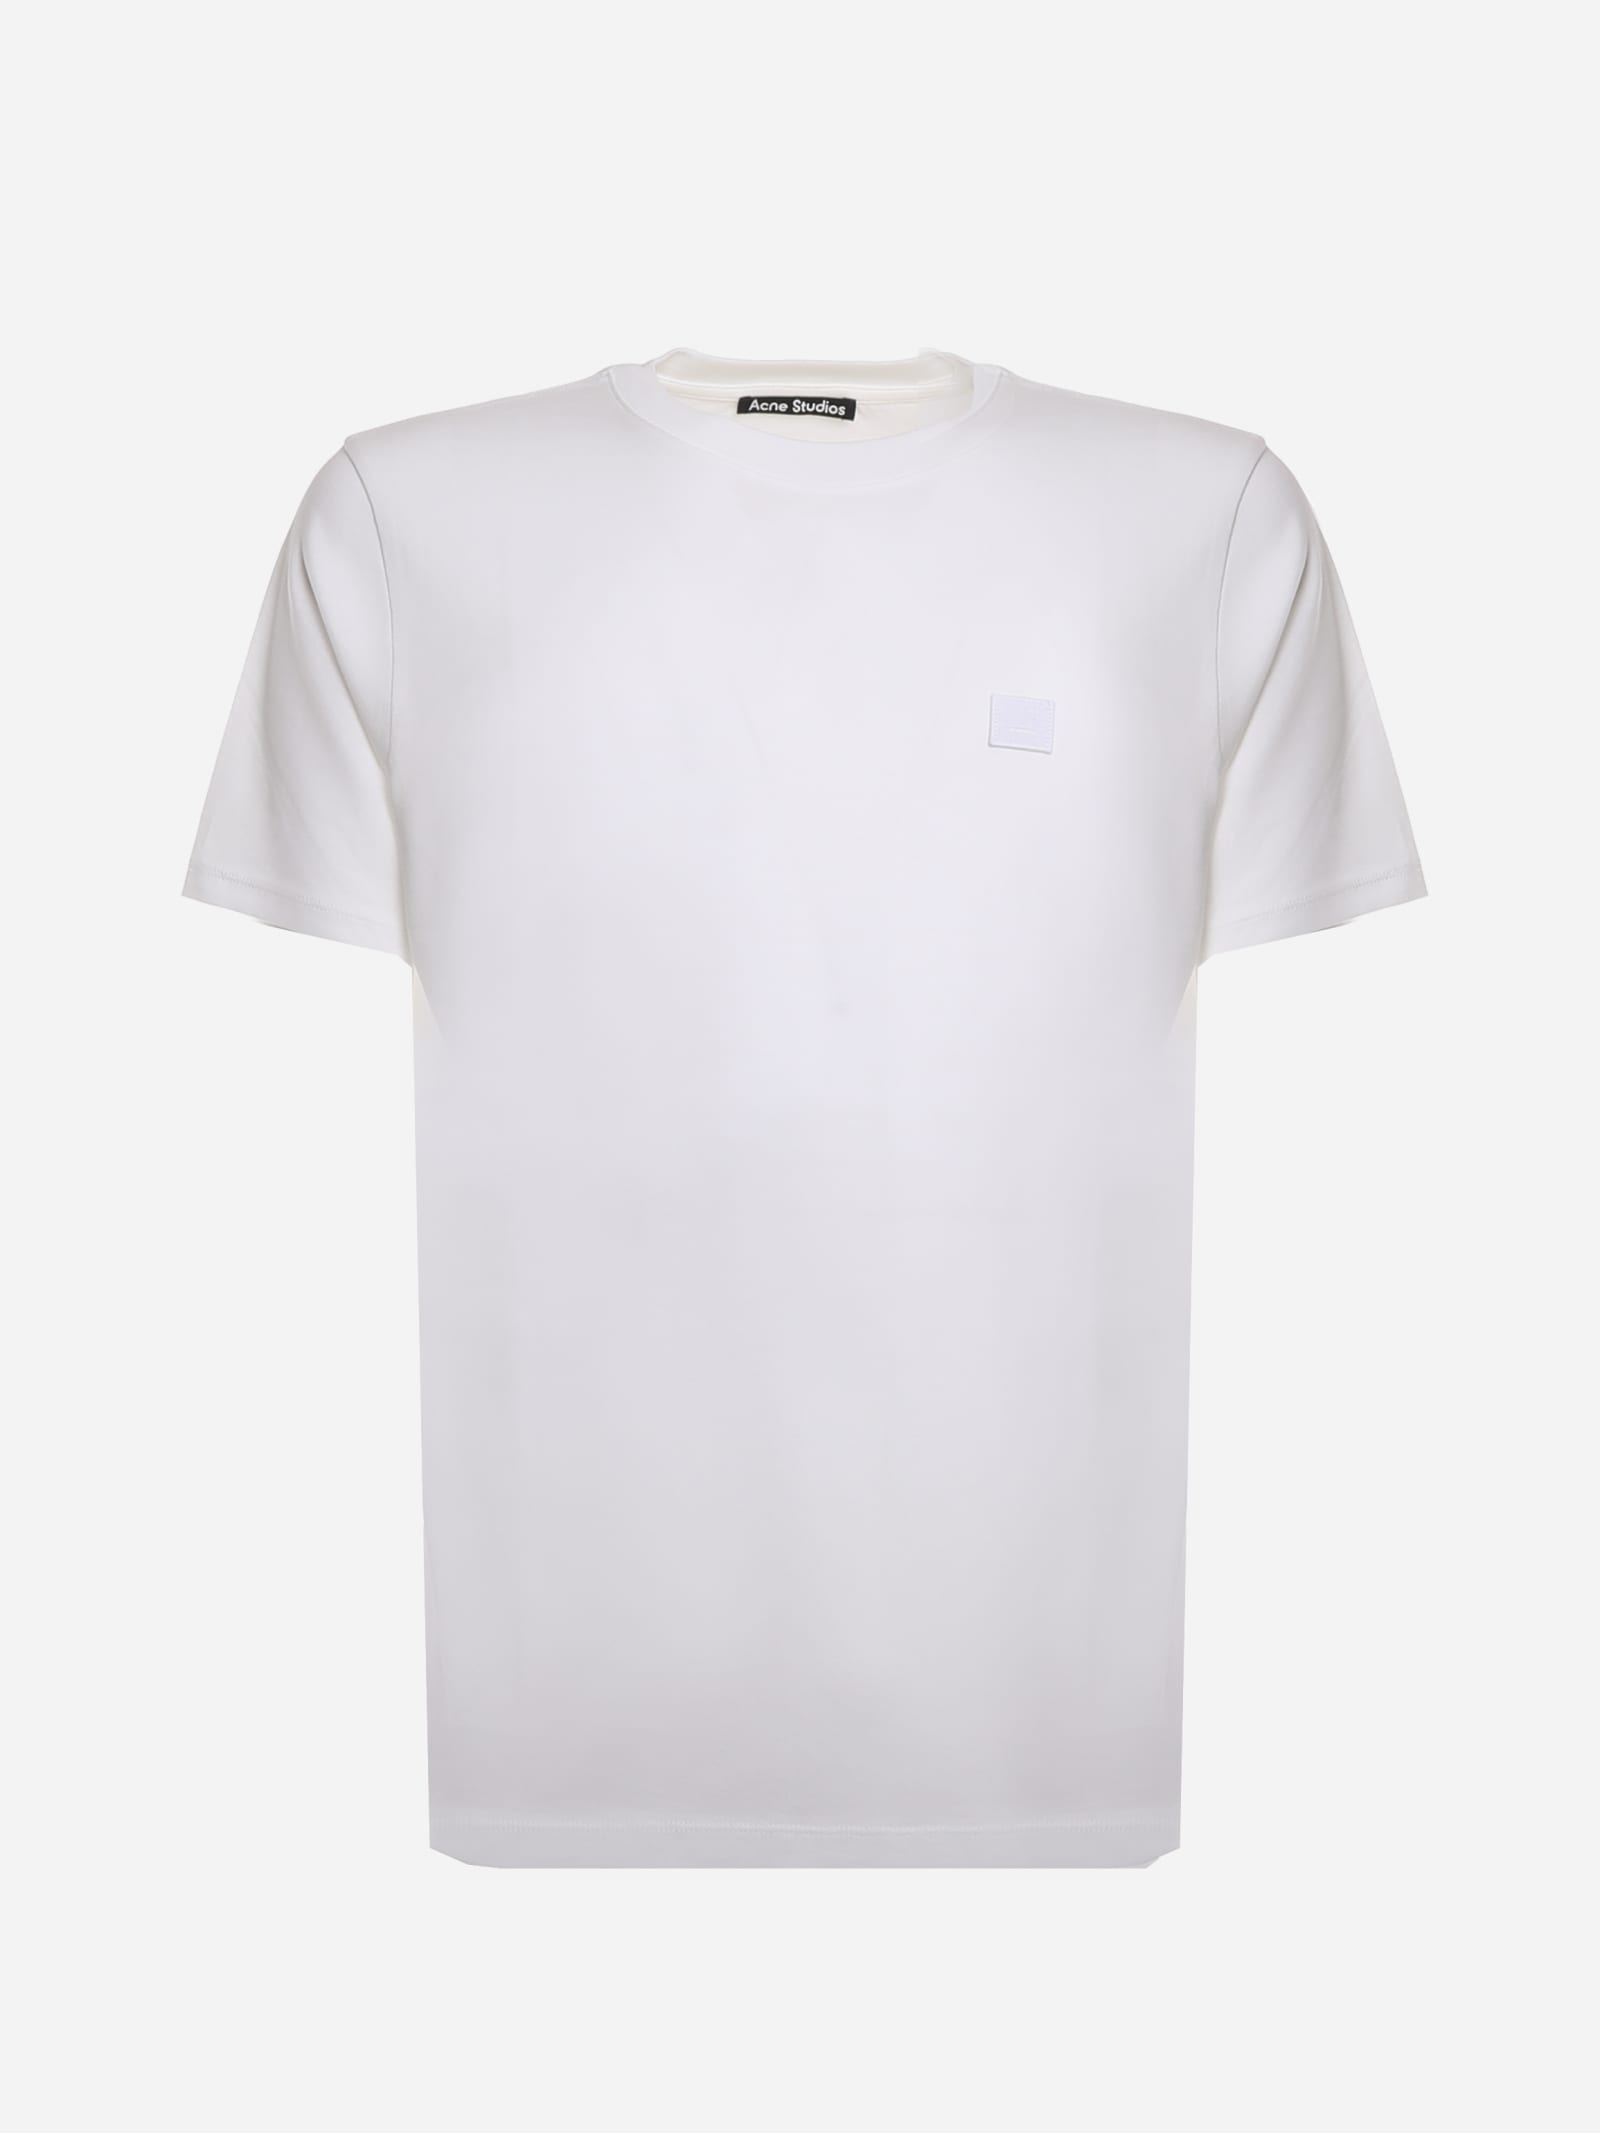 ACNE STUDIOS ORGANIC COTTON T-SHIRT WITH LOGO PATCH,11799035